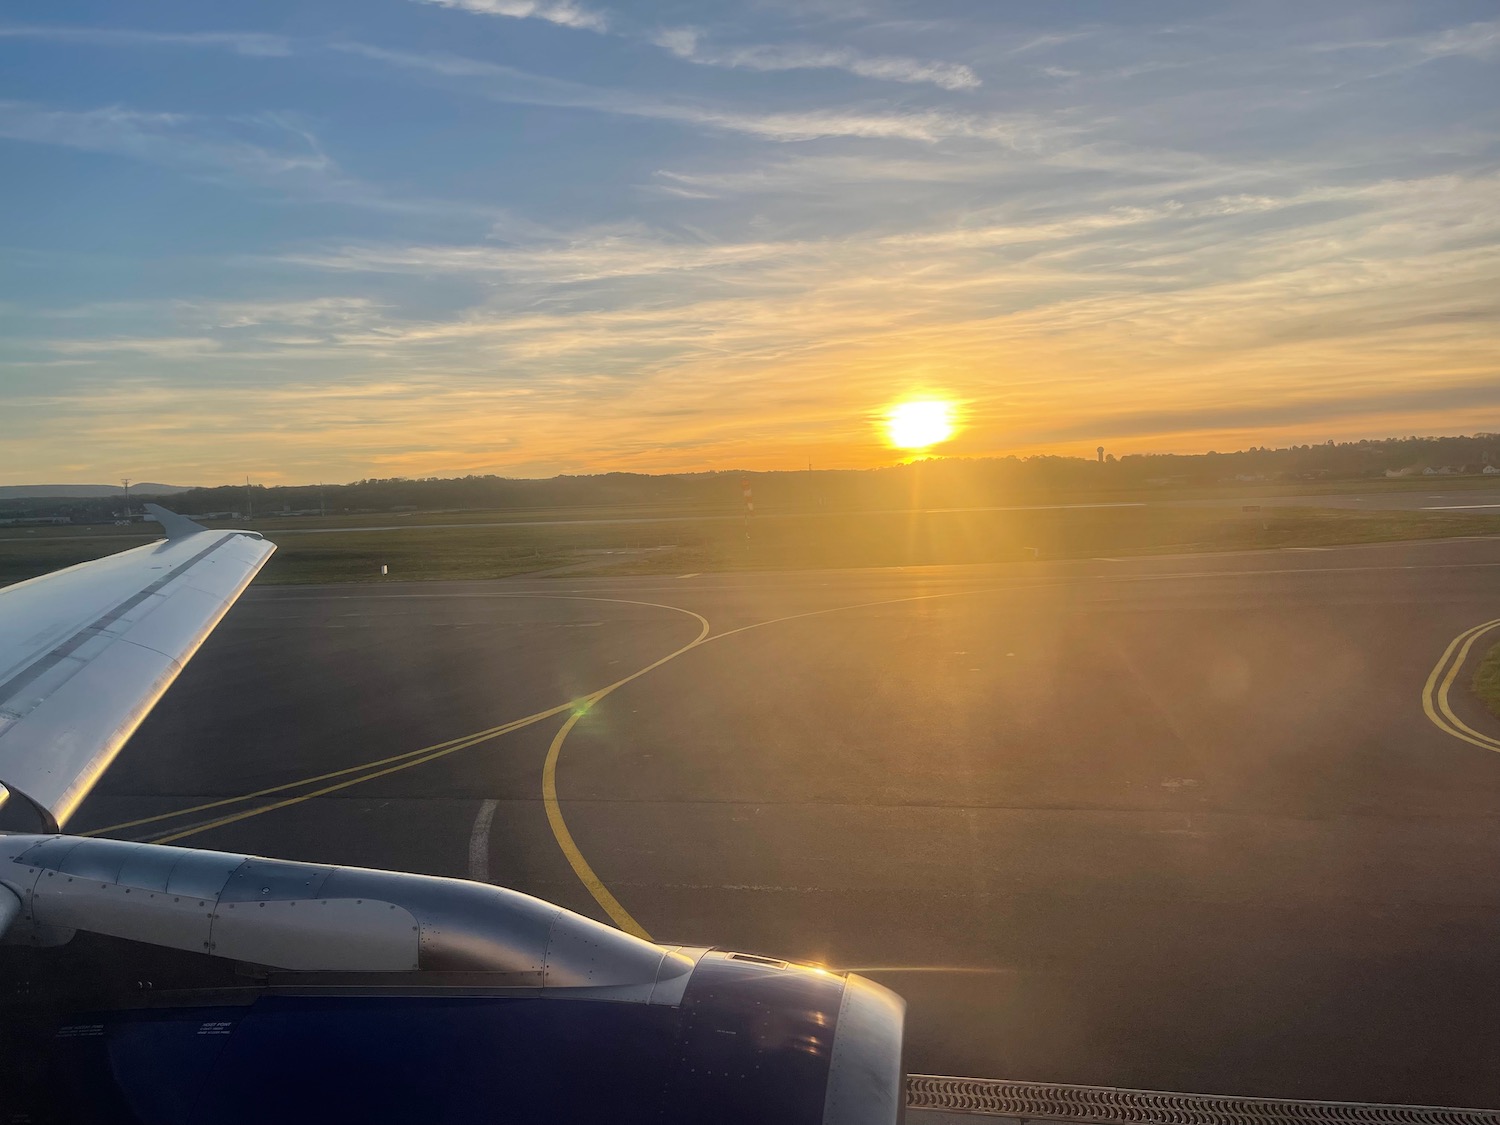 an airplane wing on a runway with the sun setting in the background